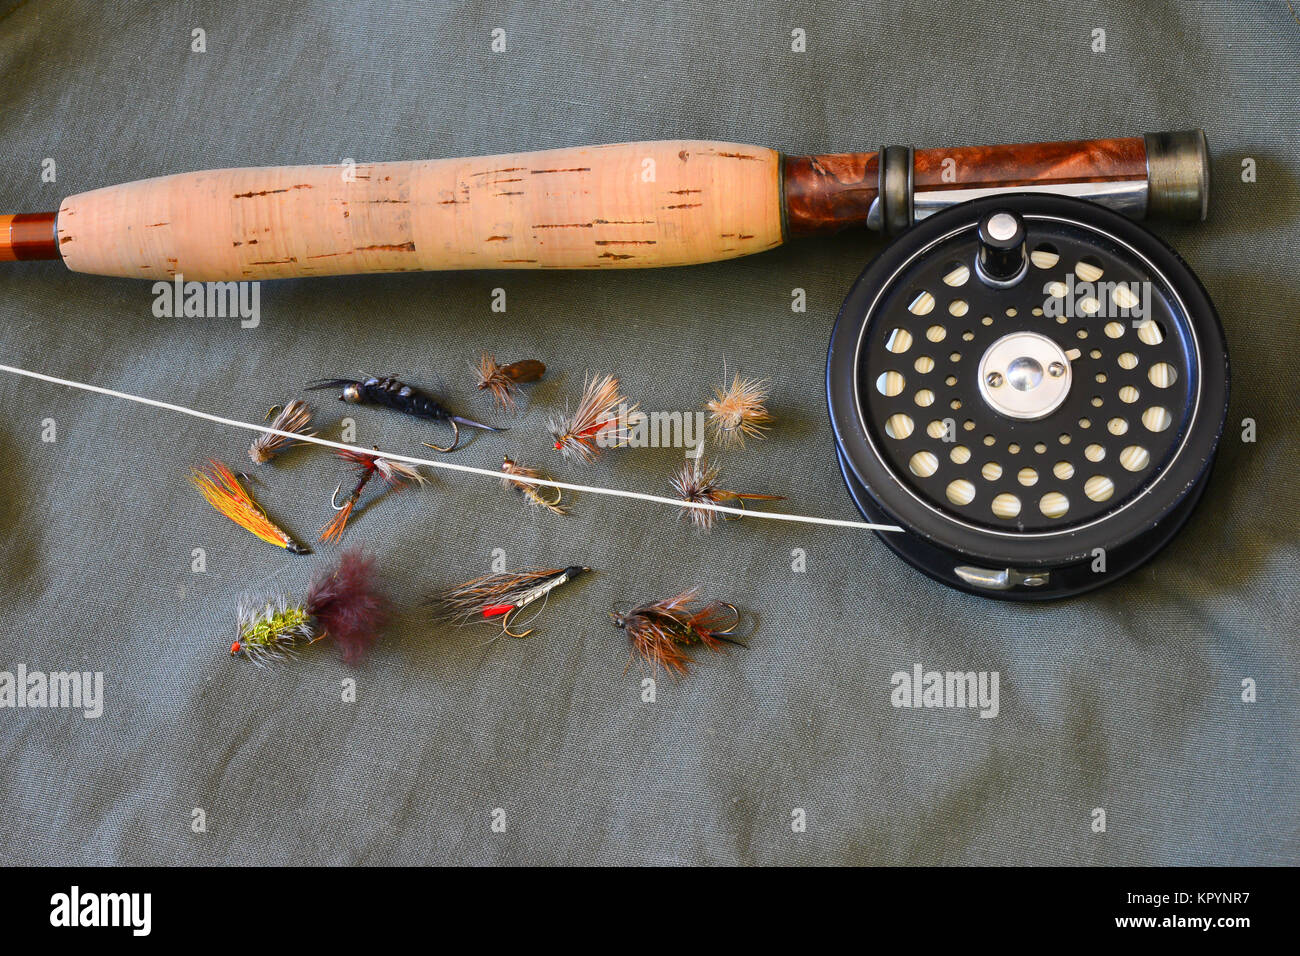 Custom bamboo fly rod, reel, line and an assortment of flies for trout fishing on a green canvas background. Stock Photo